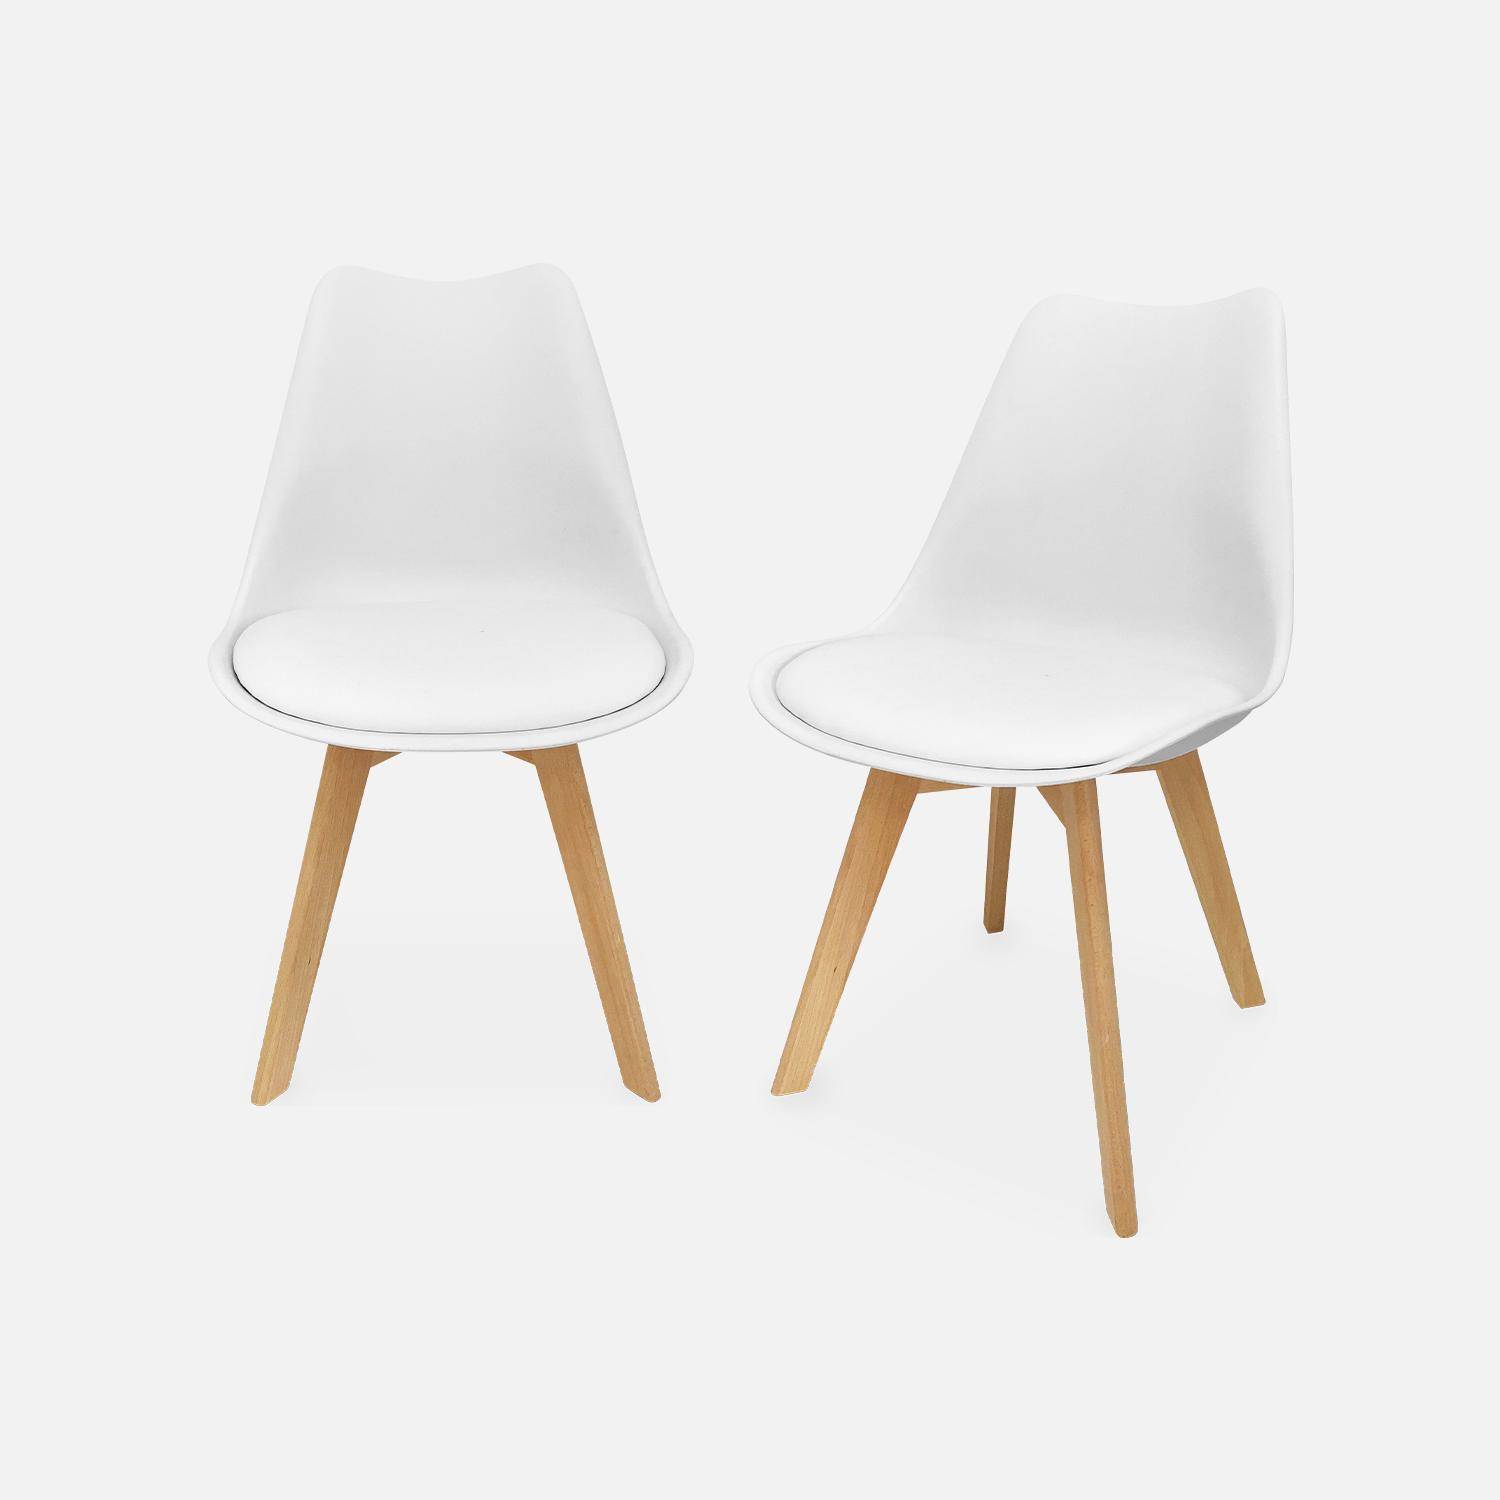 Pair of scandi-style dining chairs, white, L49xD55xH81cm, NILS,sweeek,Photo1